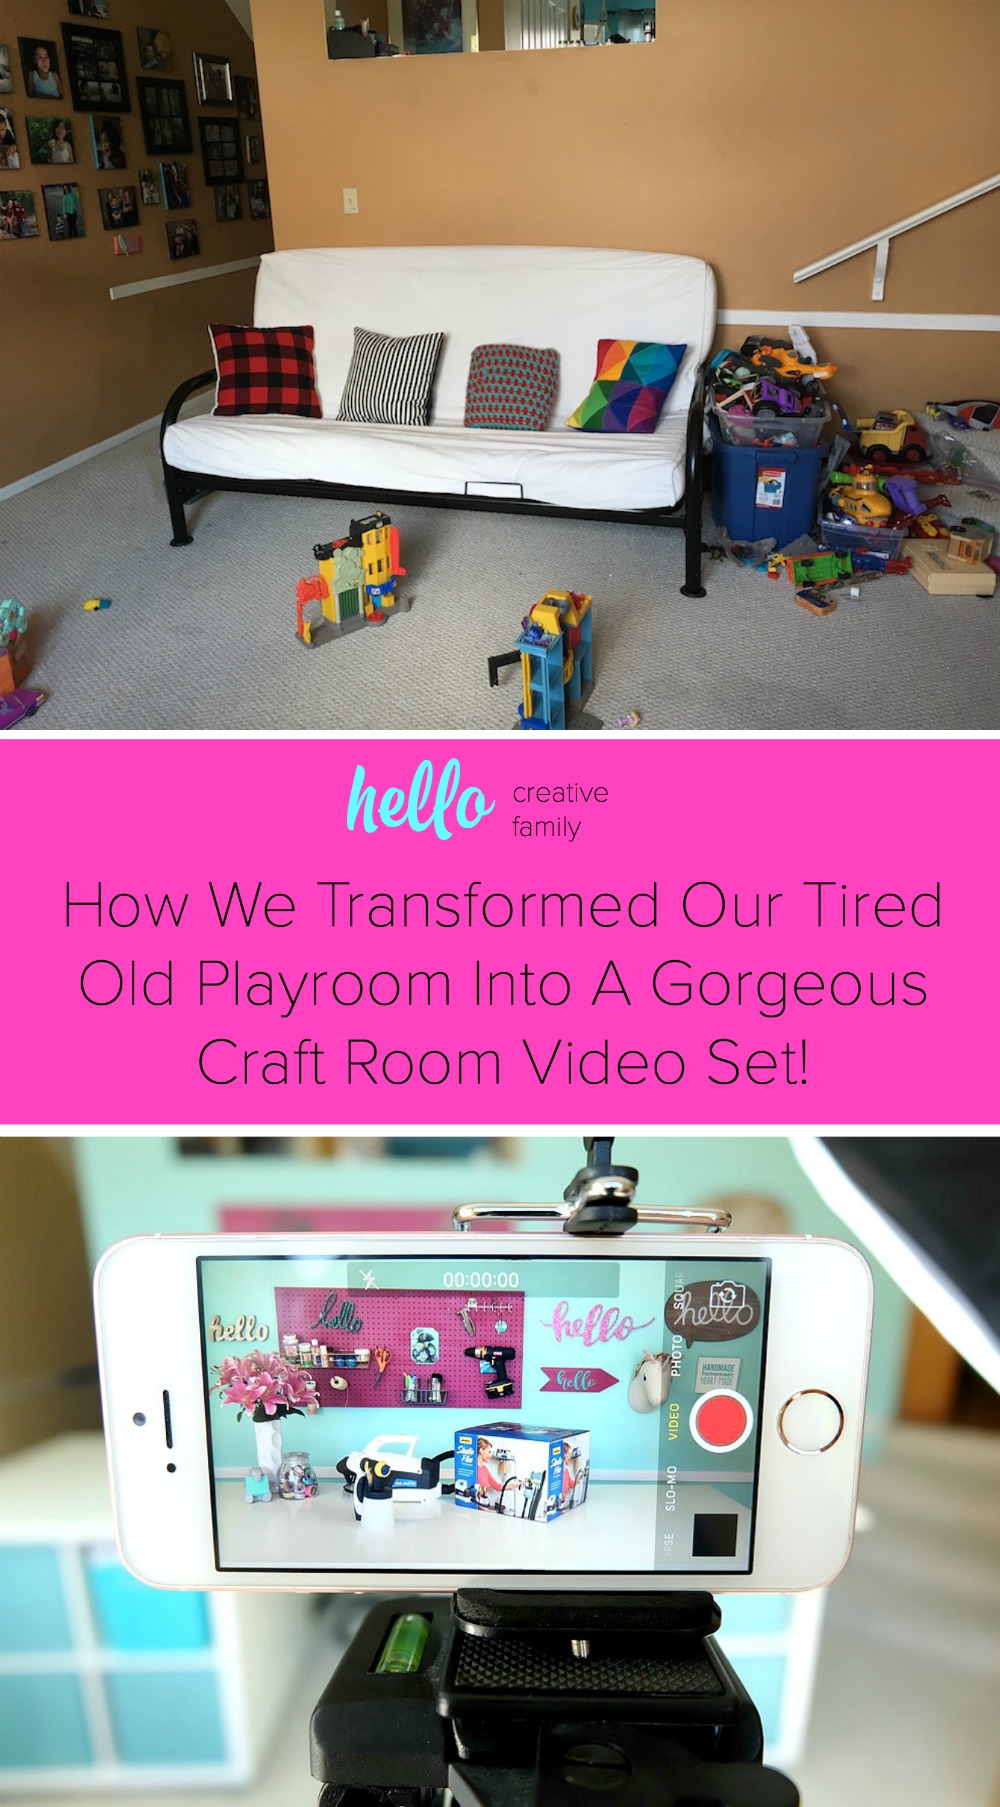 Take a sneak peek into behind the scenes of how Hello Creative Family transformed their tired old playroom into a gorgeous craft room video set! The craft table in this room is AMAZING. You will want to make your own craft room like this in your own house! #Sponsored by Wagner Paint Sprayers